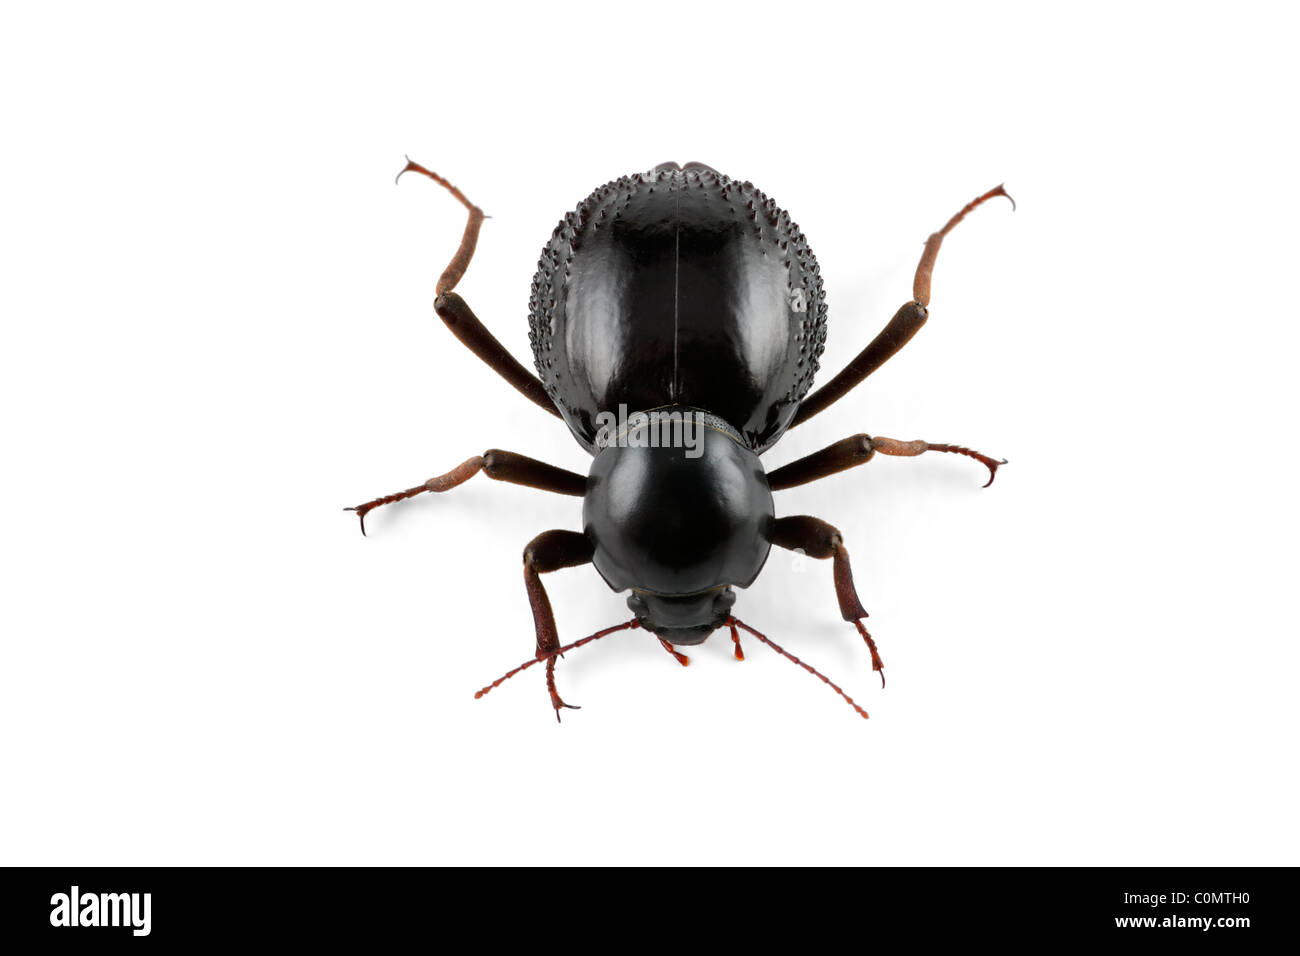 An African Tenebrionid beetle (Psammodes spp., Family Tenebrionidae) on white Stock Photo